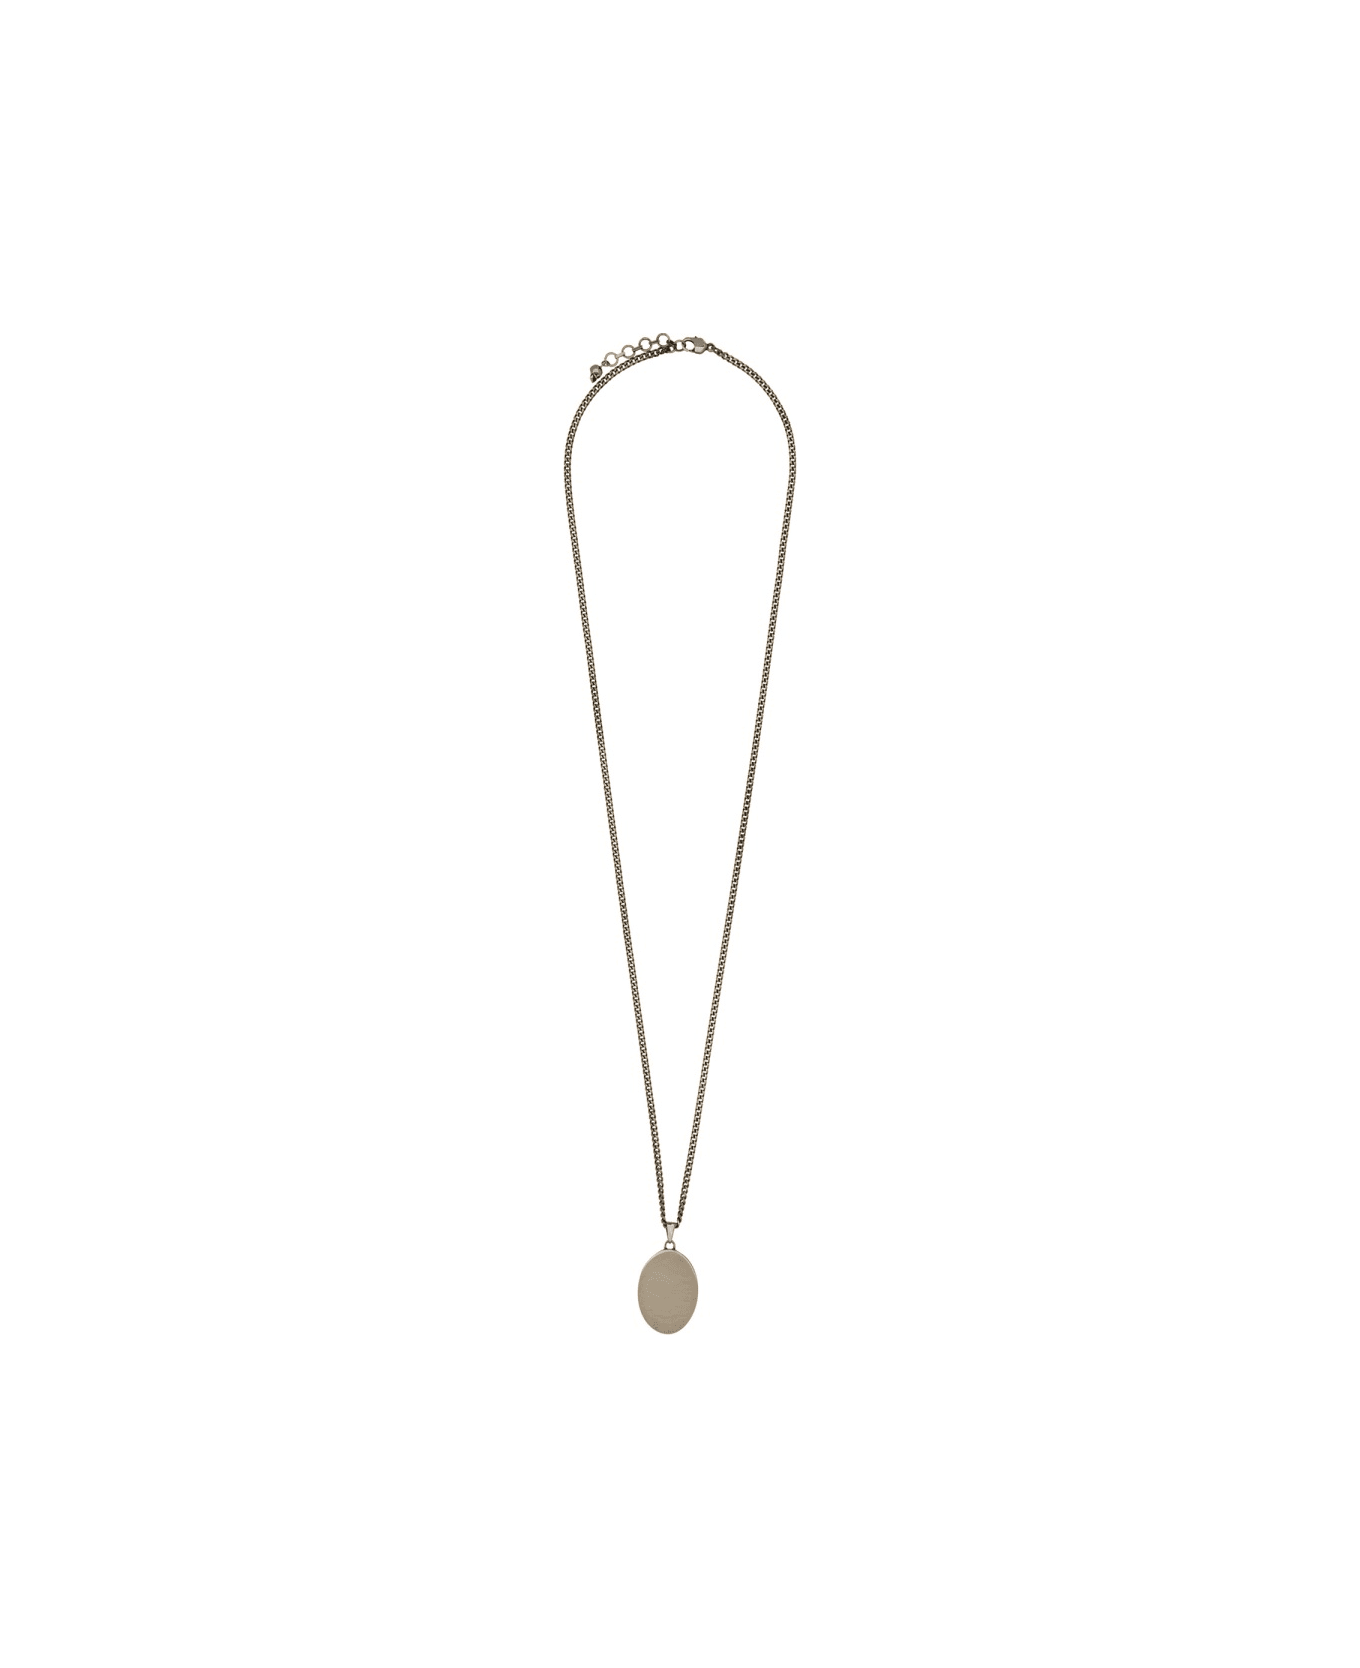 Alexander McQueen Faceted Stone Necklace - SILVER